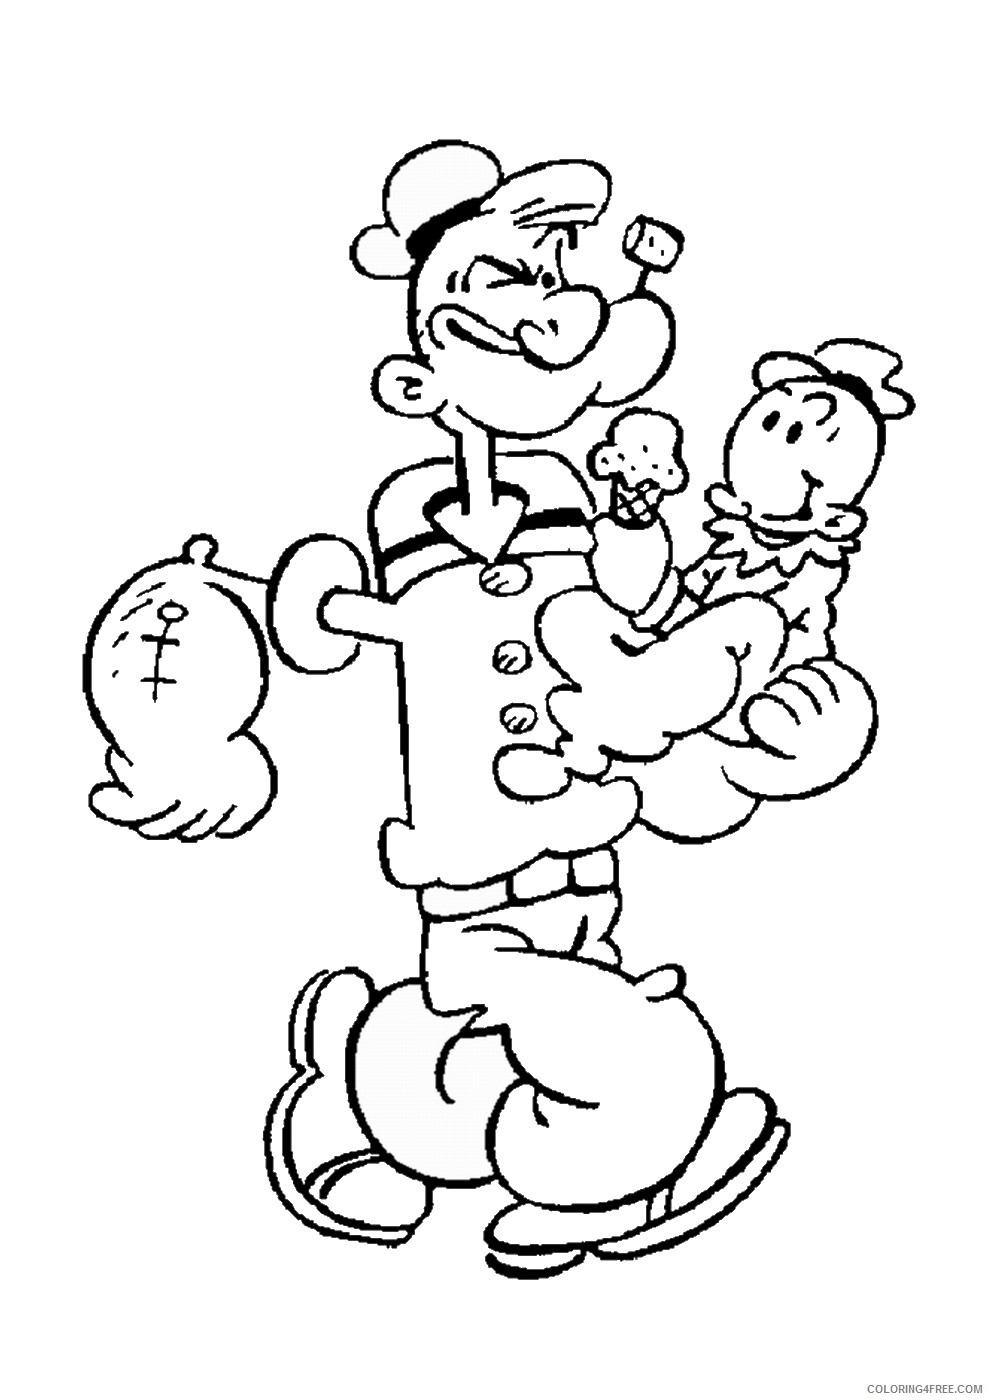 Popeye Coloring Pages Cartoons popeye_cl_27 Printable 2020 5035 Coloring4free